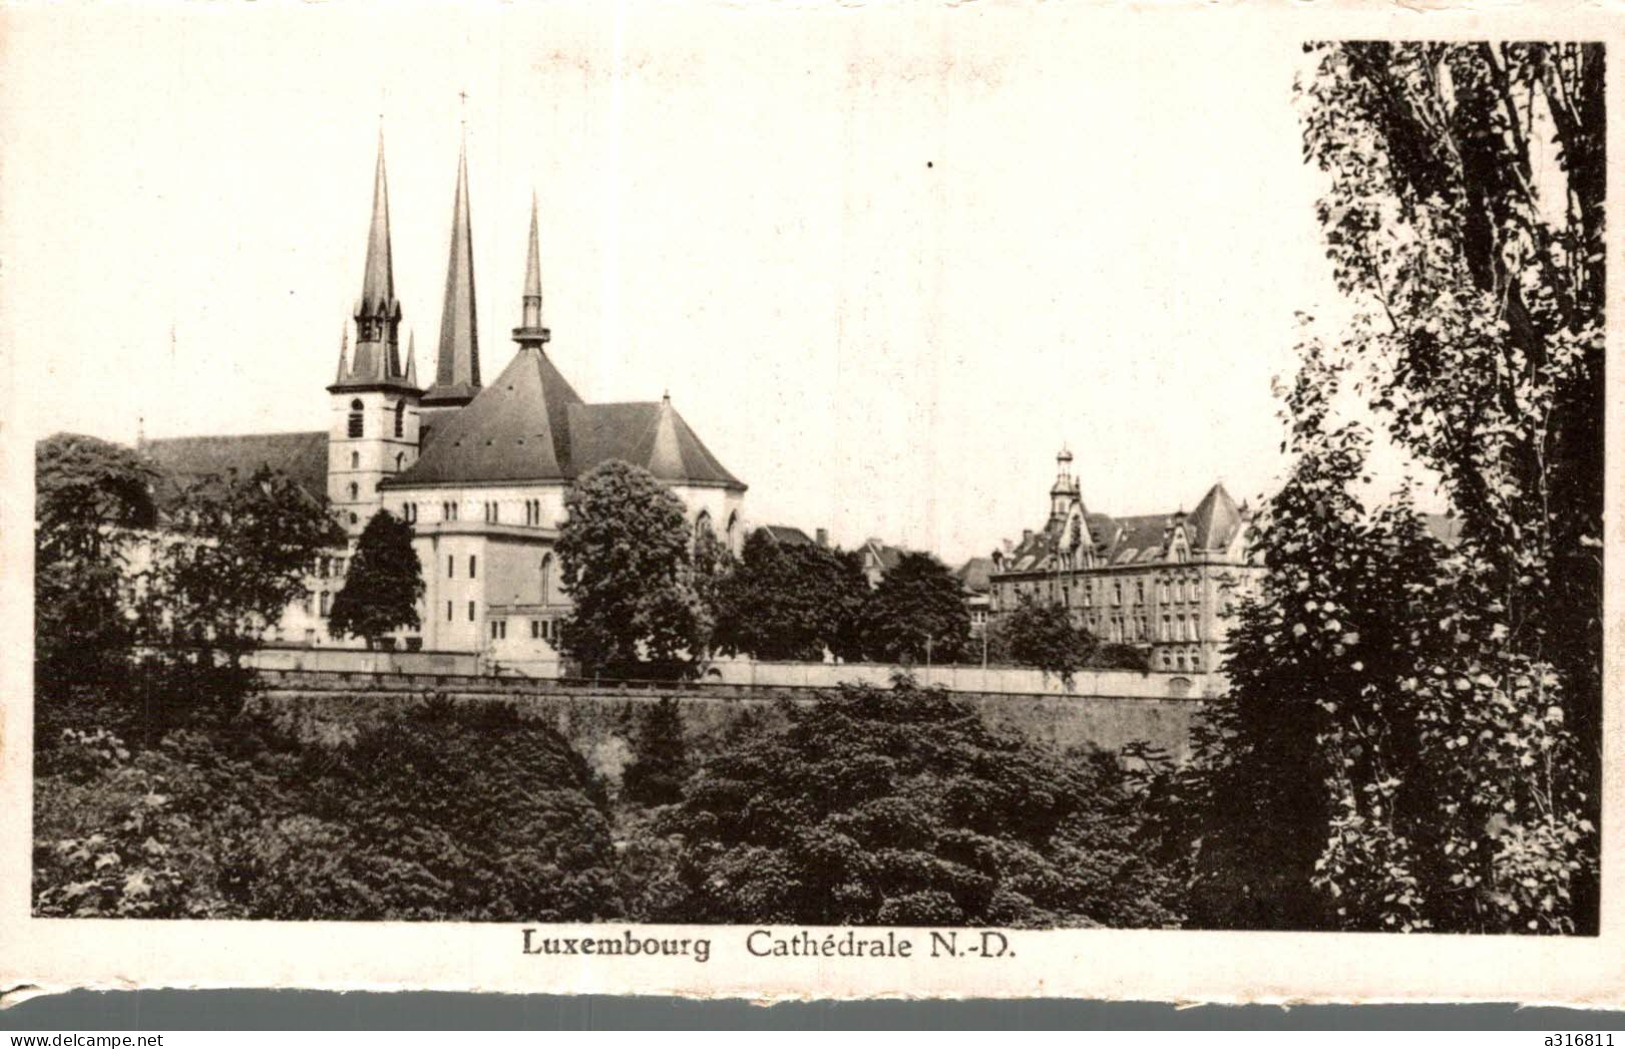 Luxembourg Cathedrale - Luxembourg - Ville